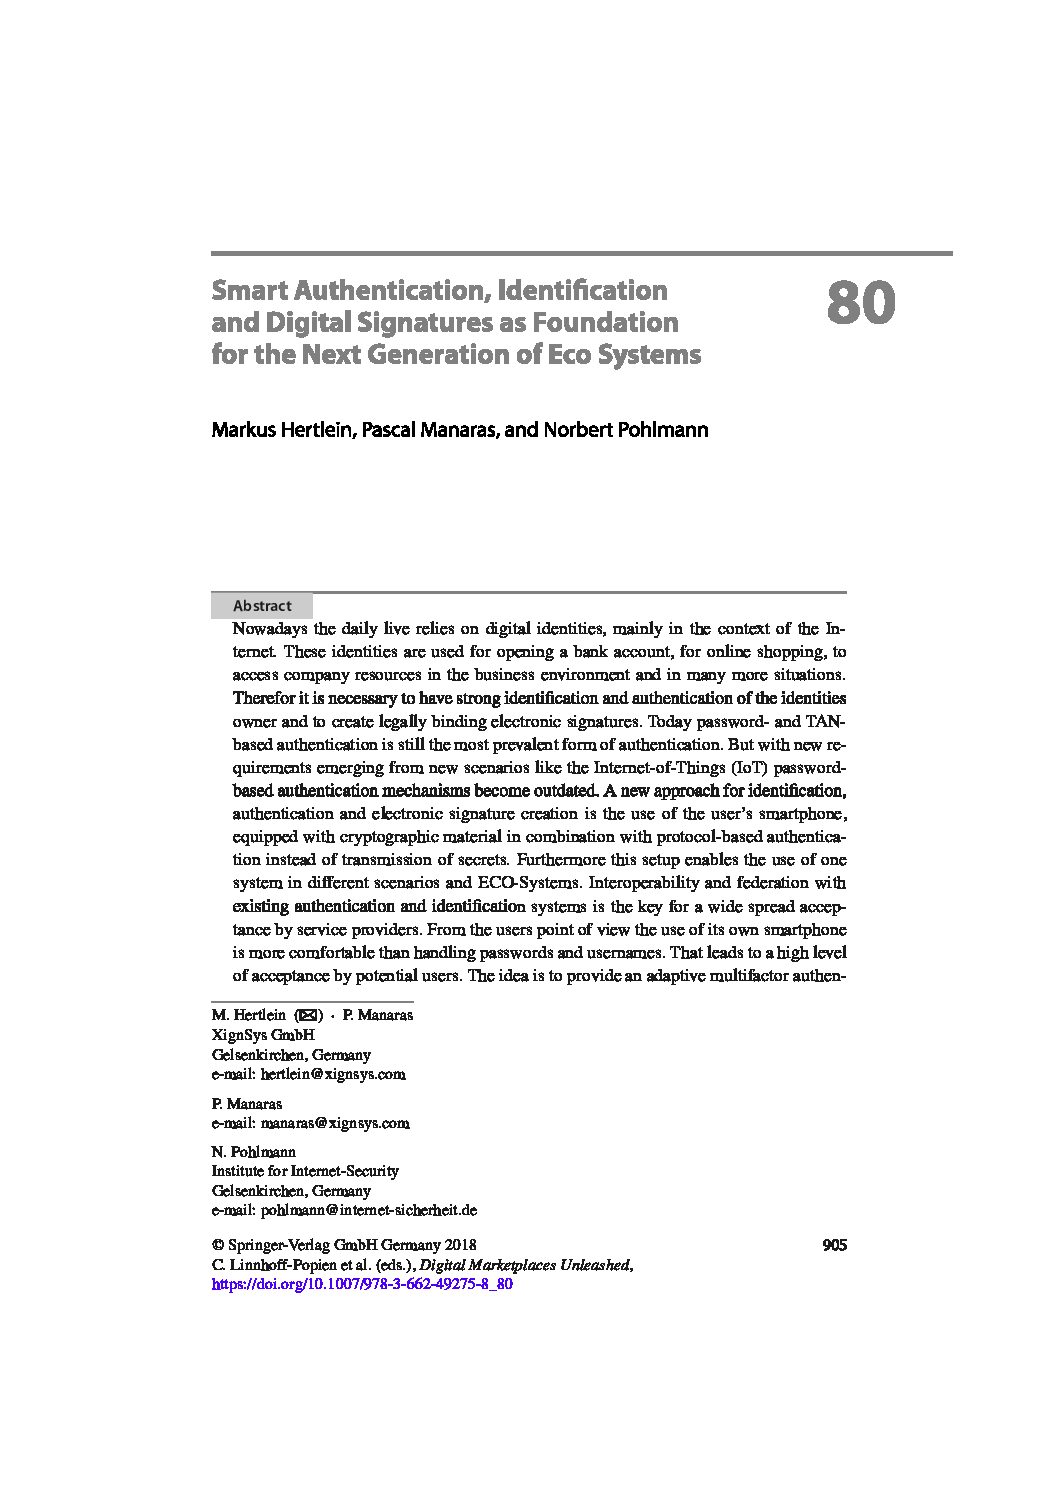 Artikel Smart-Authentication-Identification-and-Digital-Signatures-as-Foundation-for-the-Next-Generation-of-Eco-Systems-Prof.-Norbert-Pohlmann-pdf